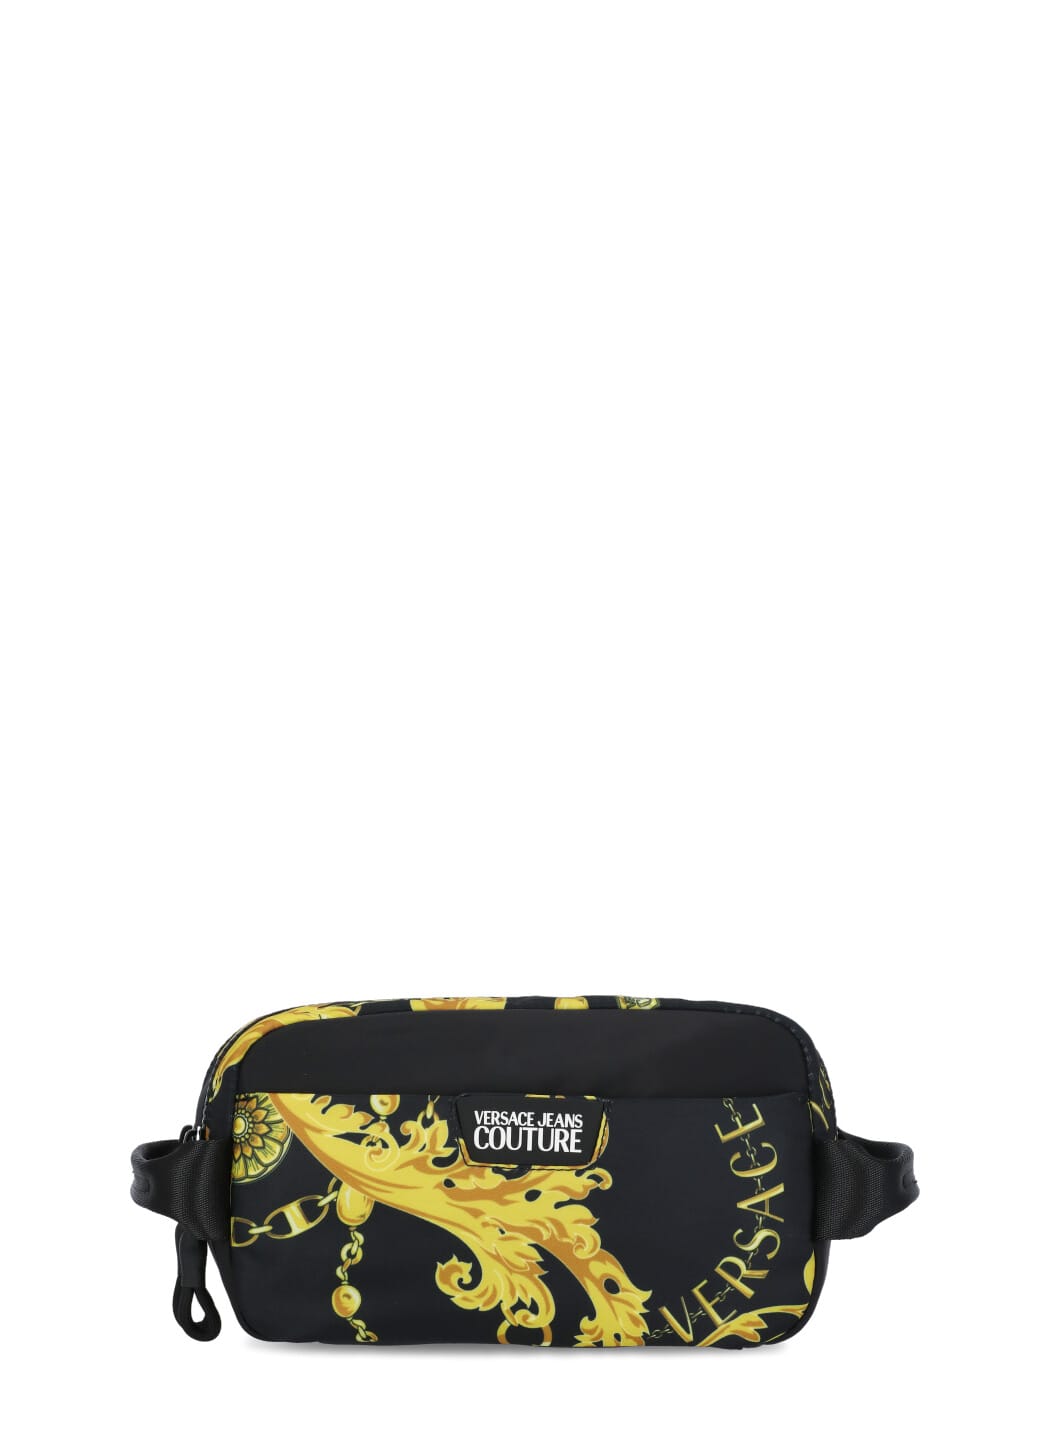 VERSACE JEANS COUTURE BEAUTY CASE WITH LOGO